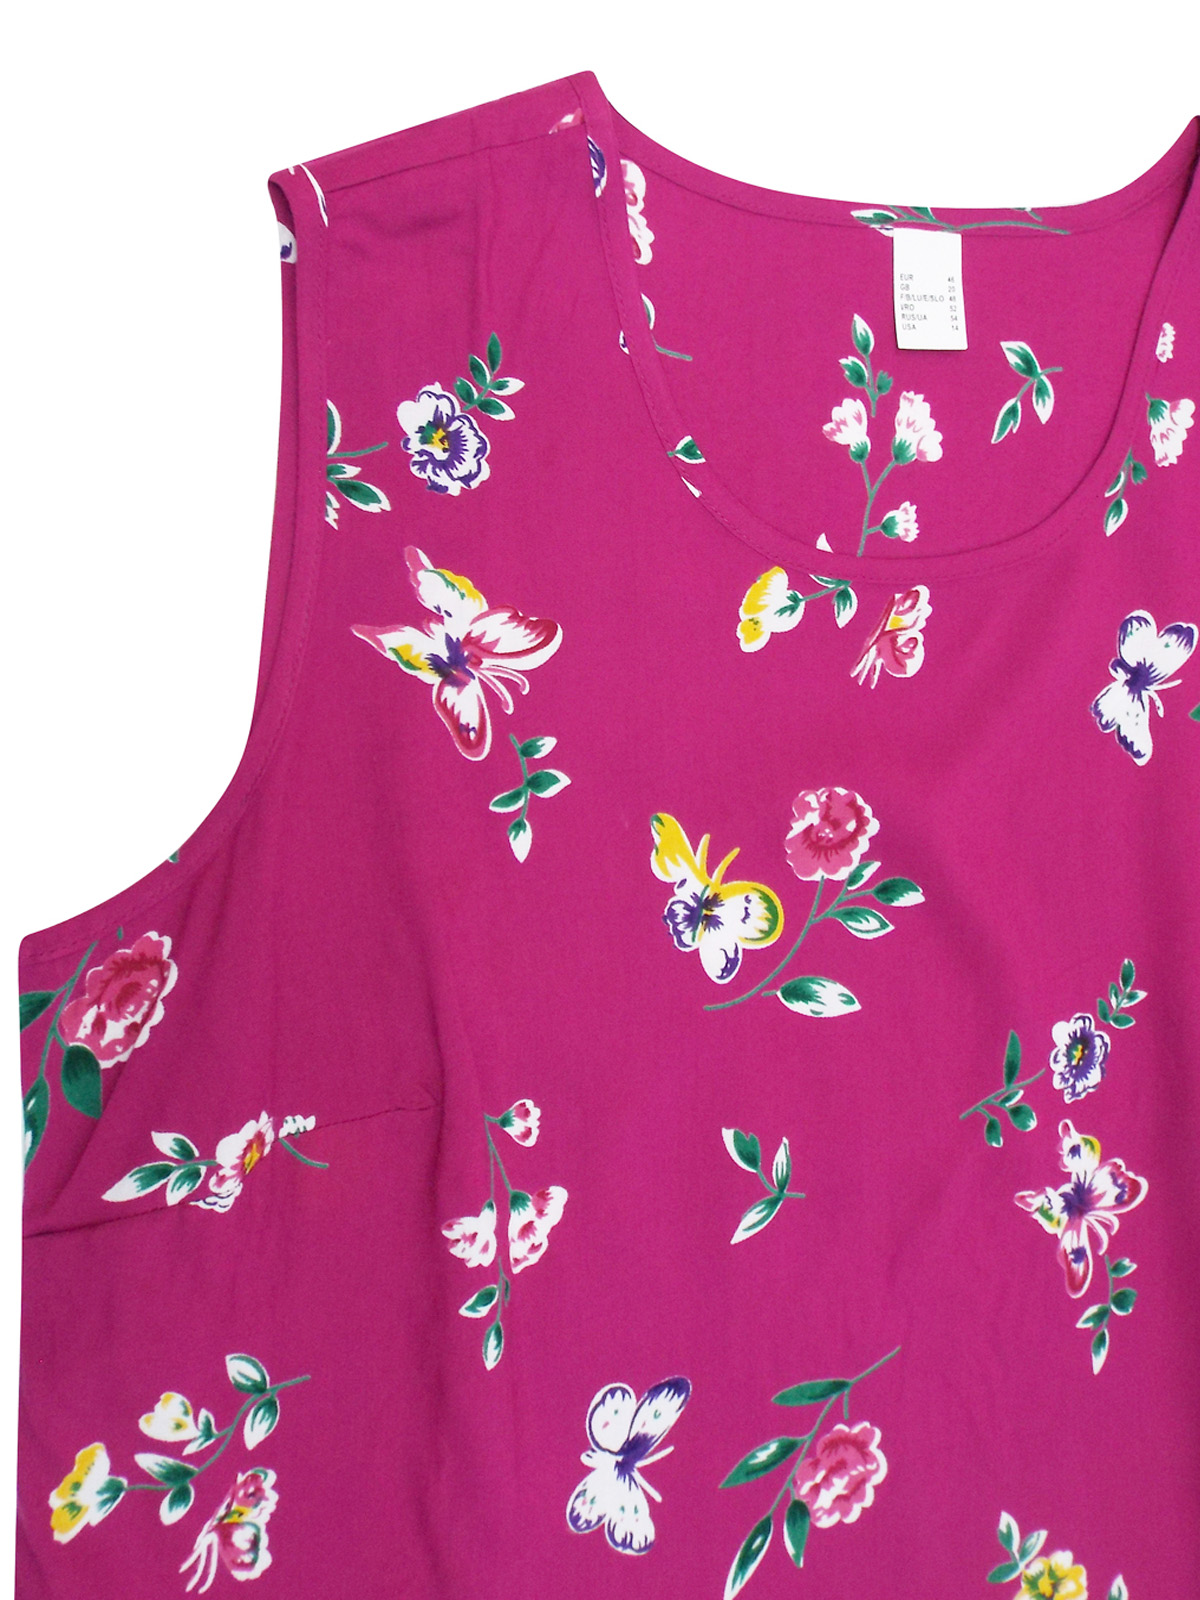 PINK Floral Print Vest Top - Plus Size 20 to 30 (EU 46 to 56)